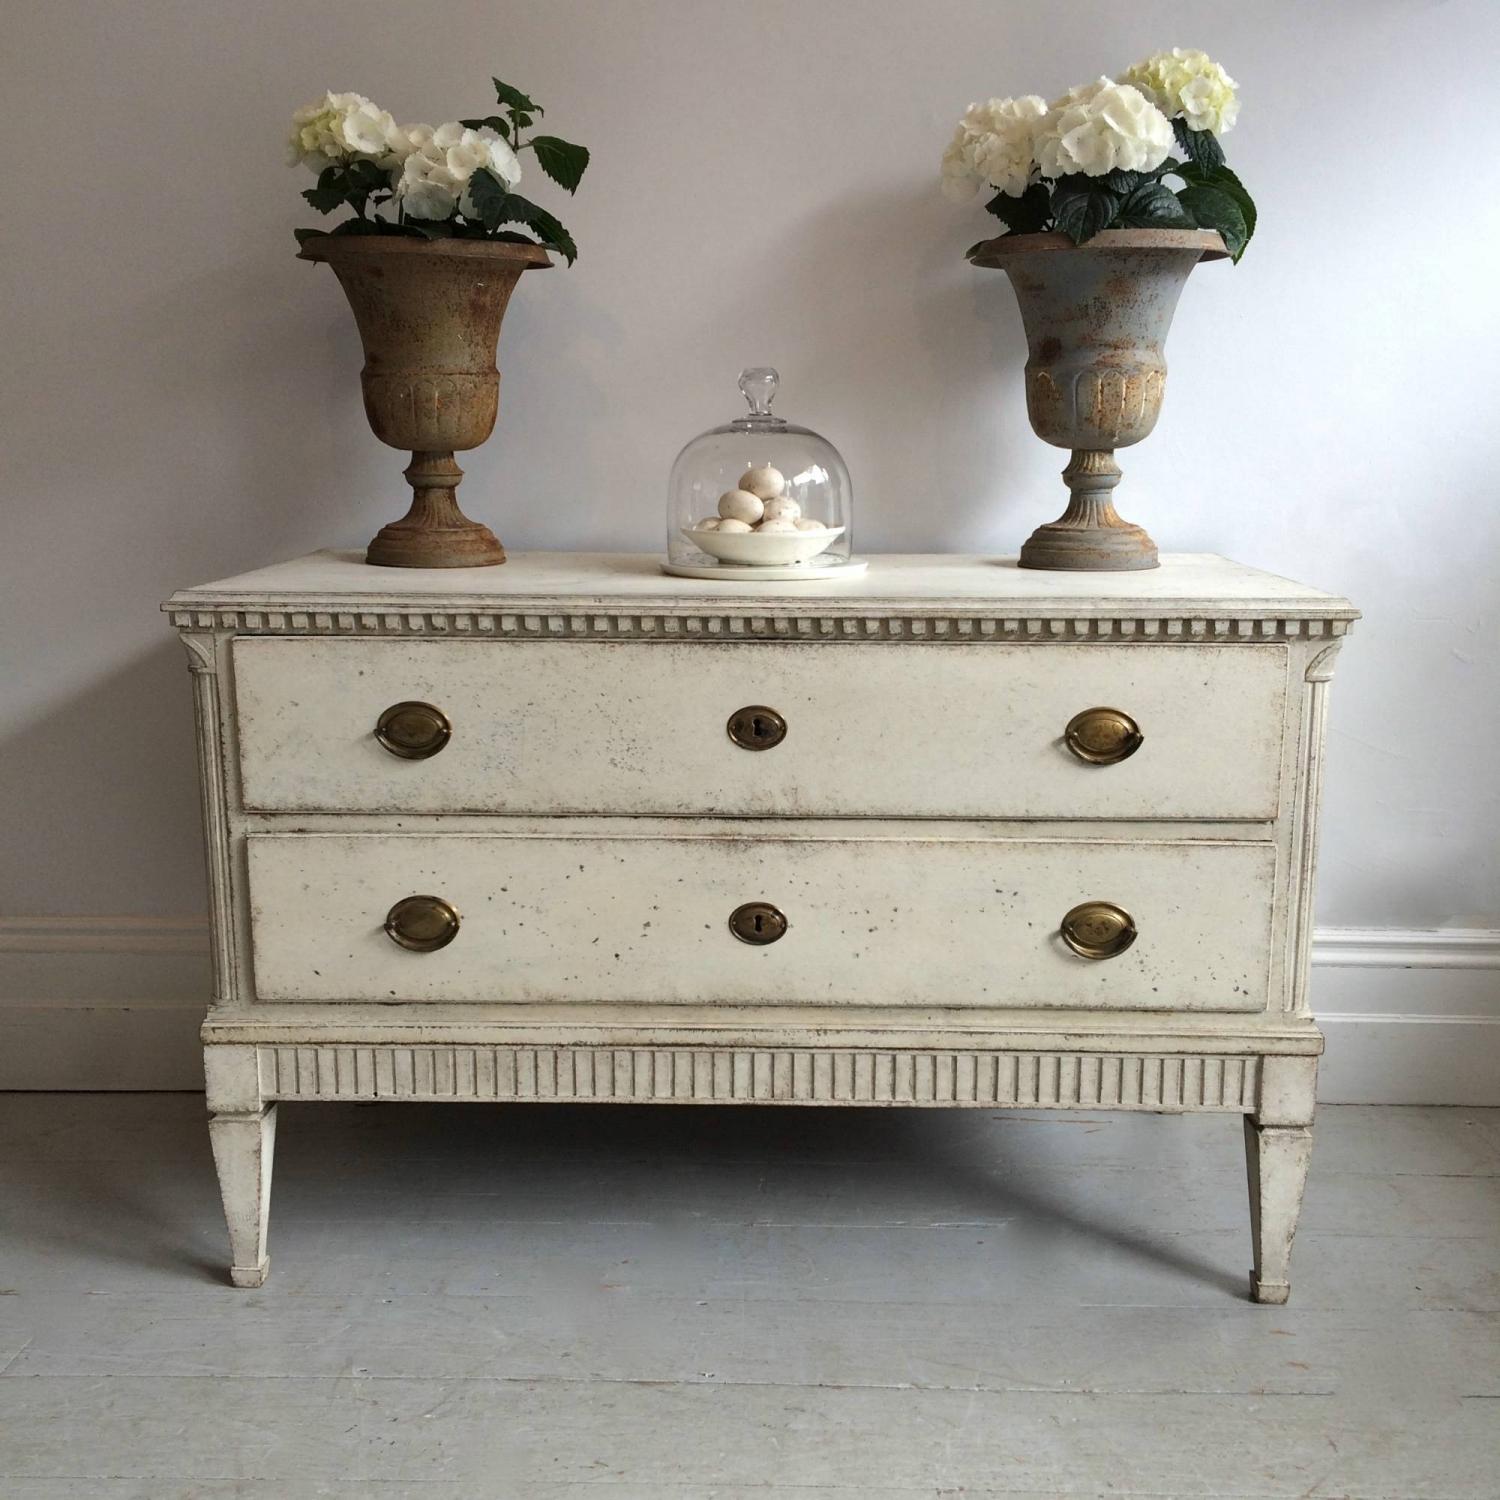 LARGE 19TH CENTURY GUSTAVIAN STYLE CHEST